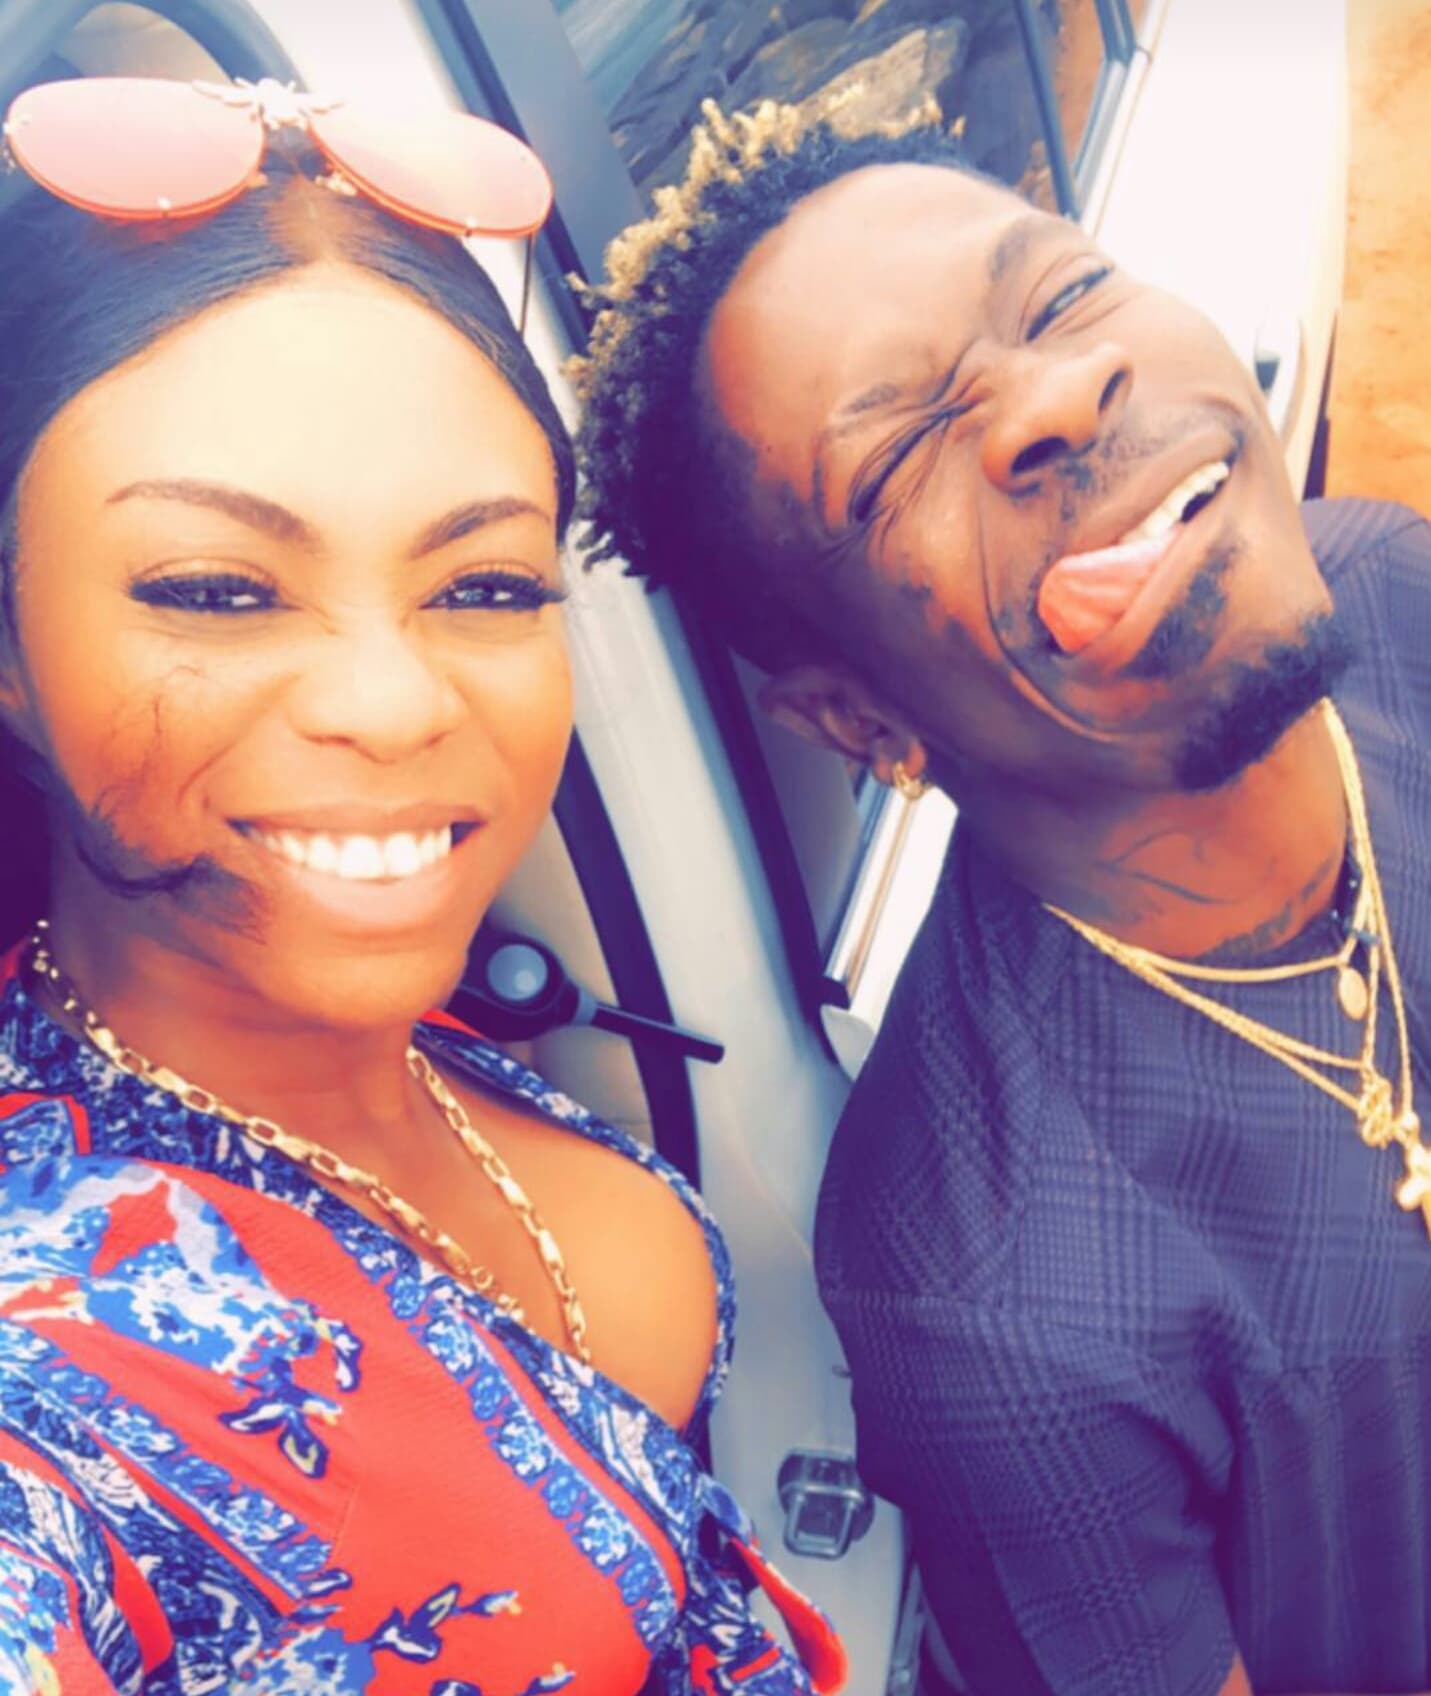 Shatta Wale takes ‘babes’ Shatta Michy for a ride after church